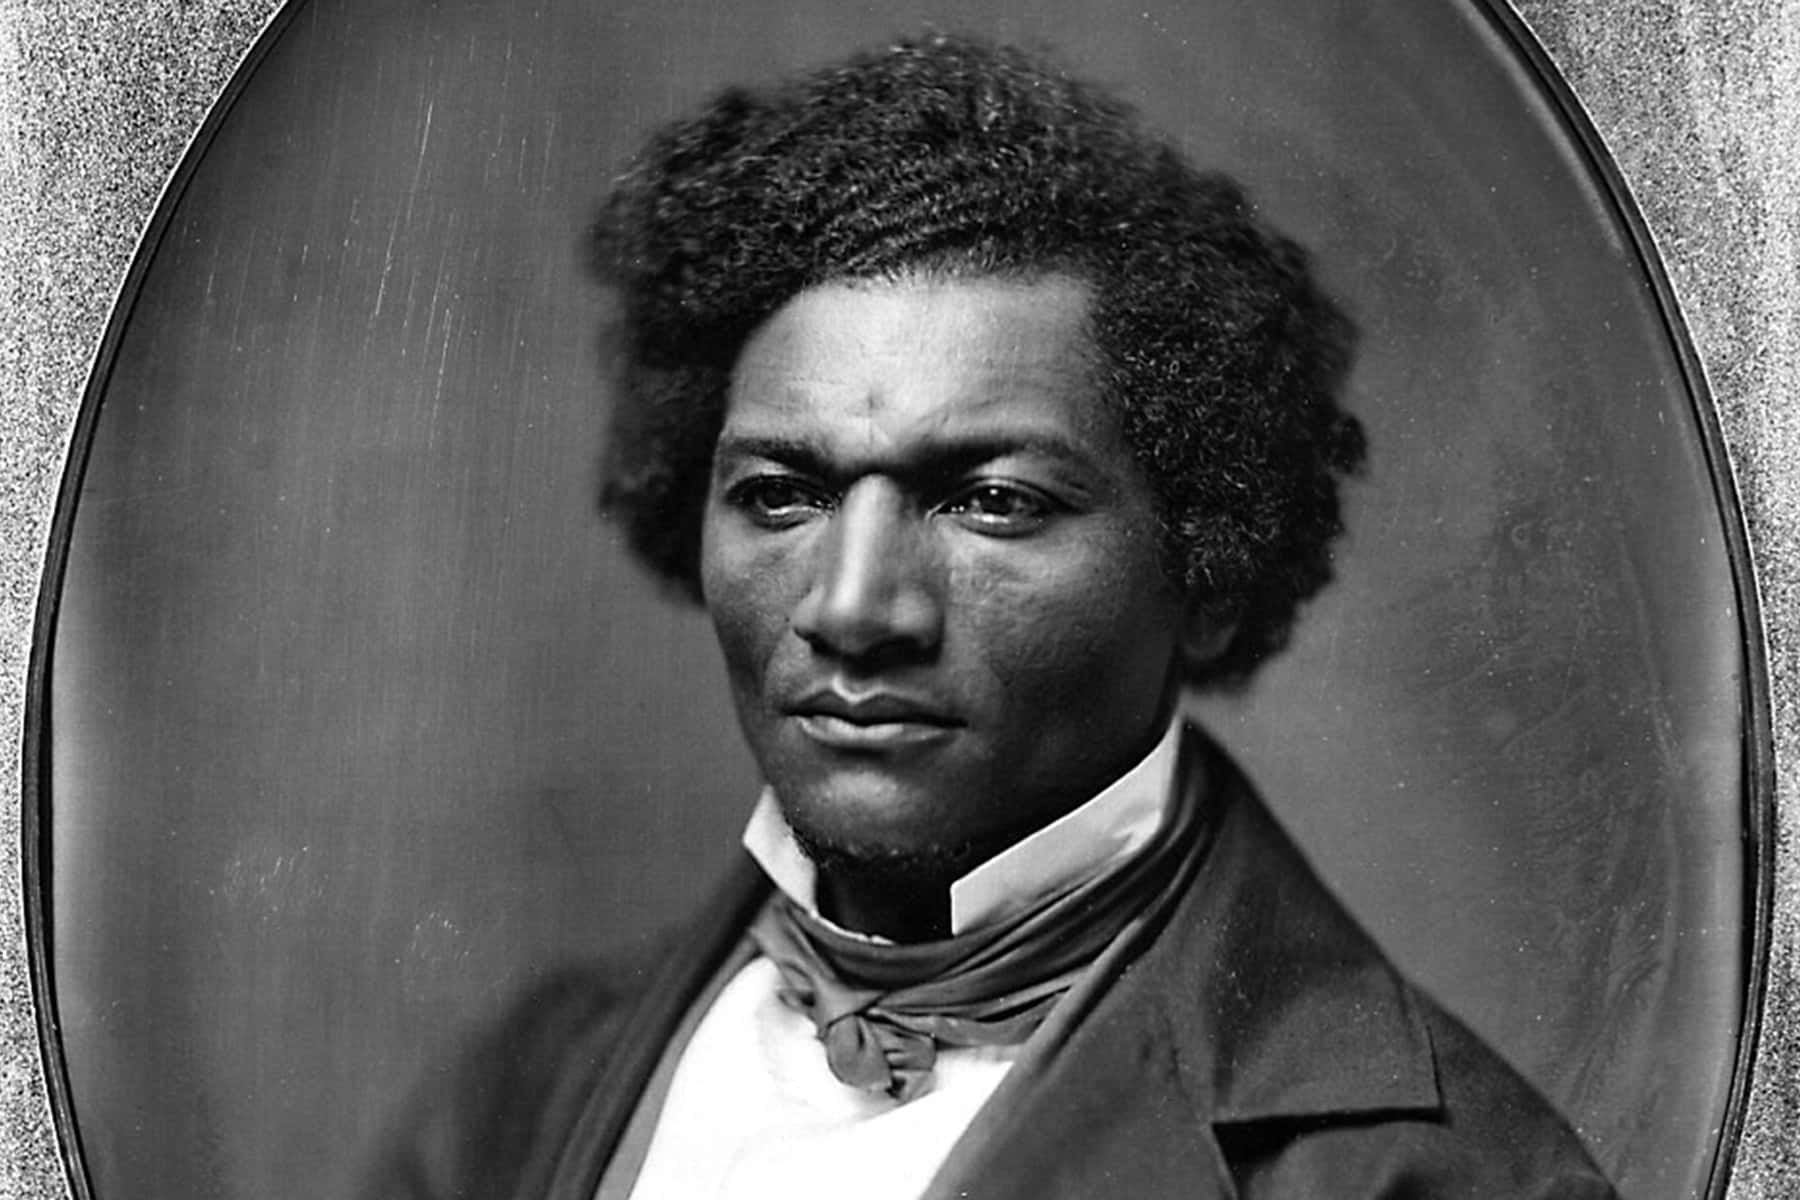 Prophet of Freedom: Biography details the life of abolitionist Frederick Douglass ...1800 x 1200